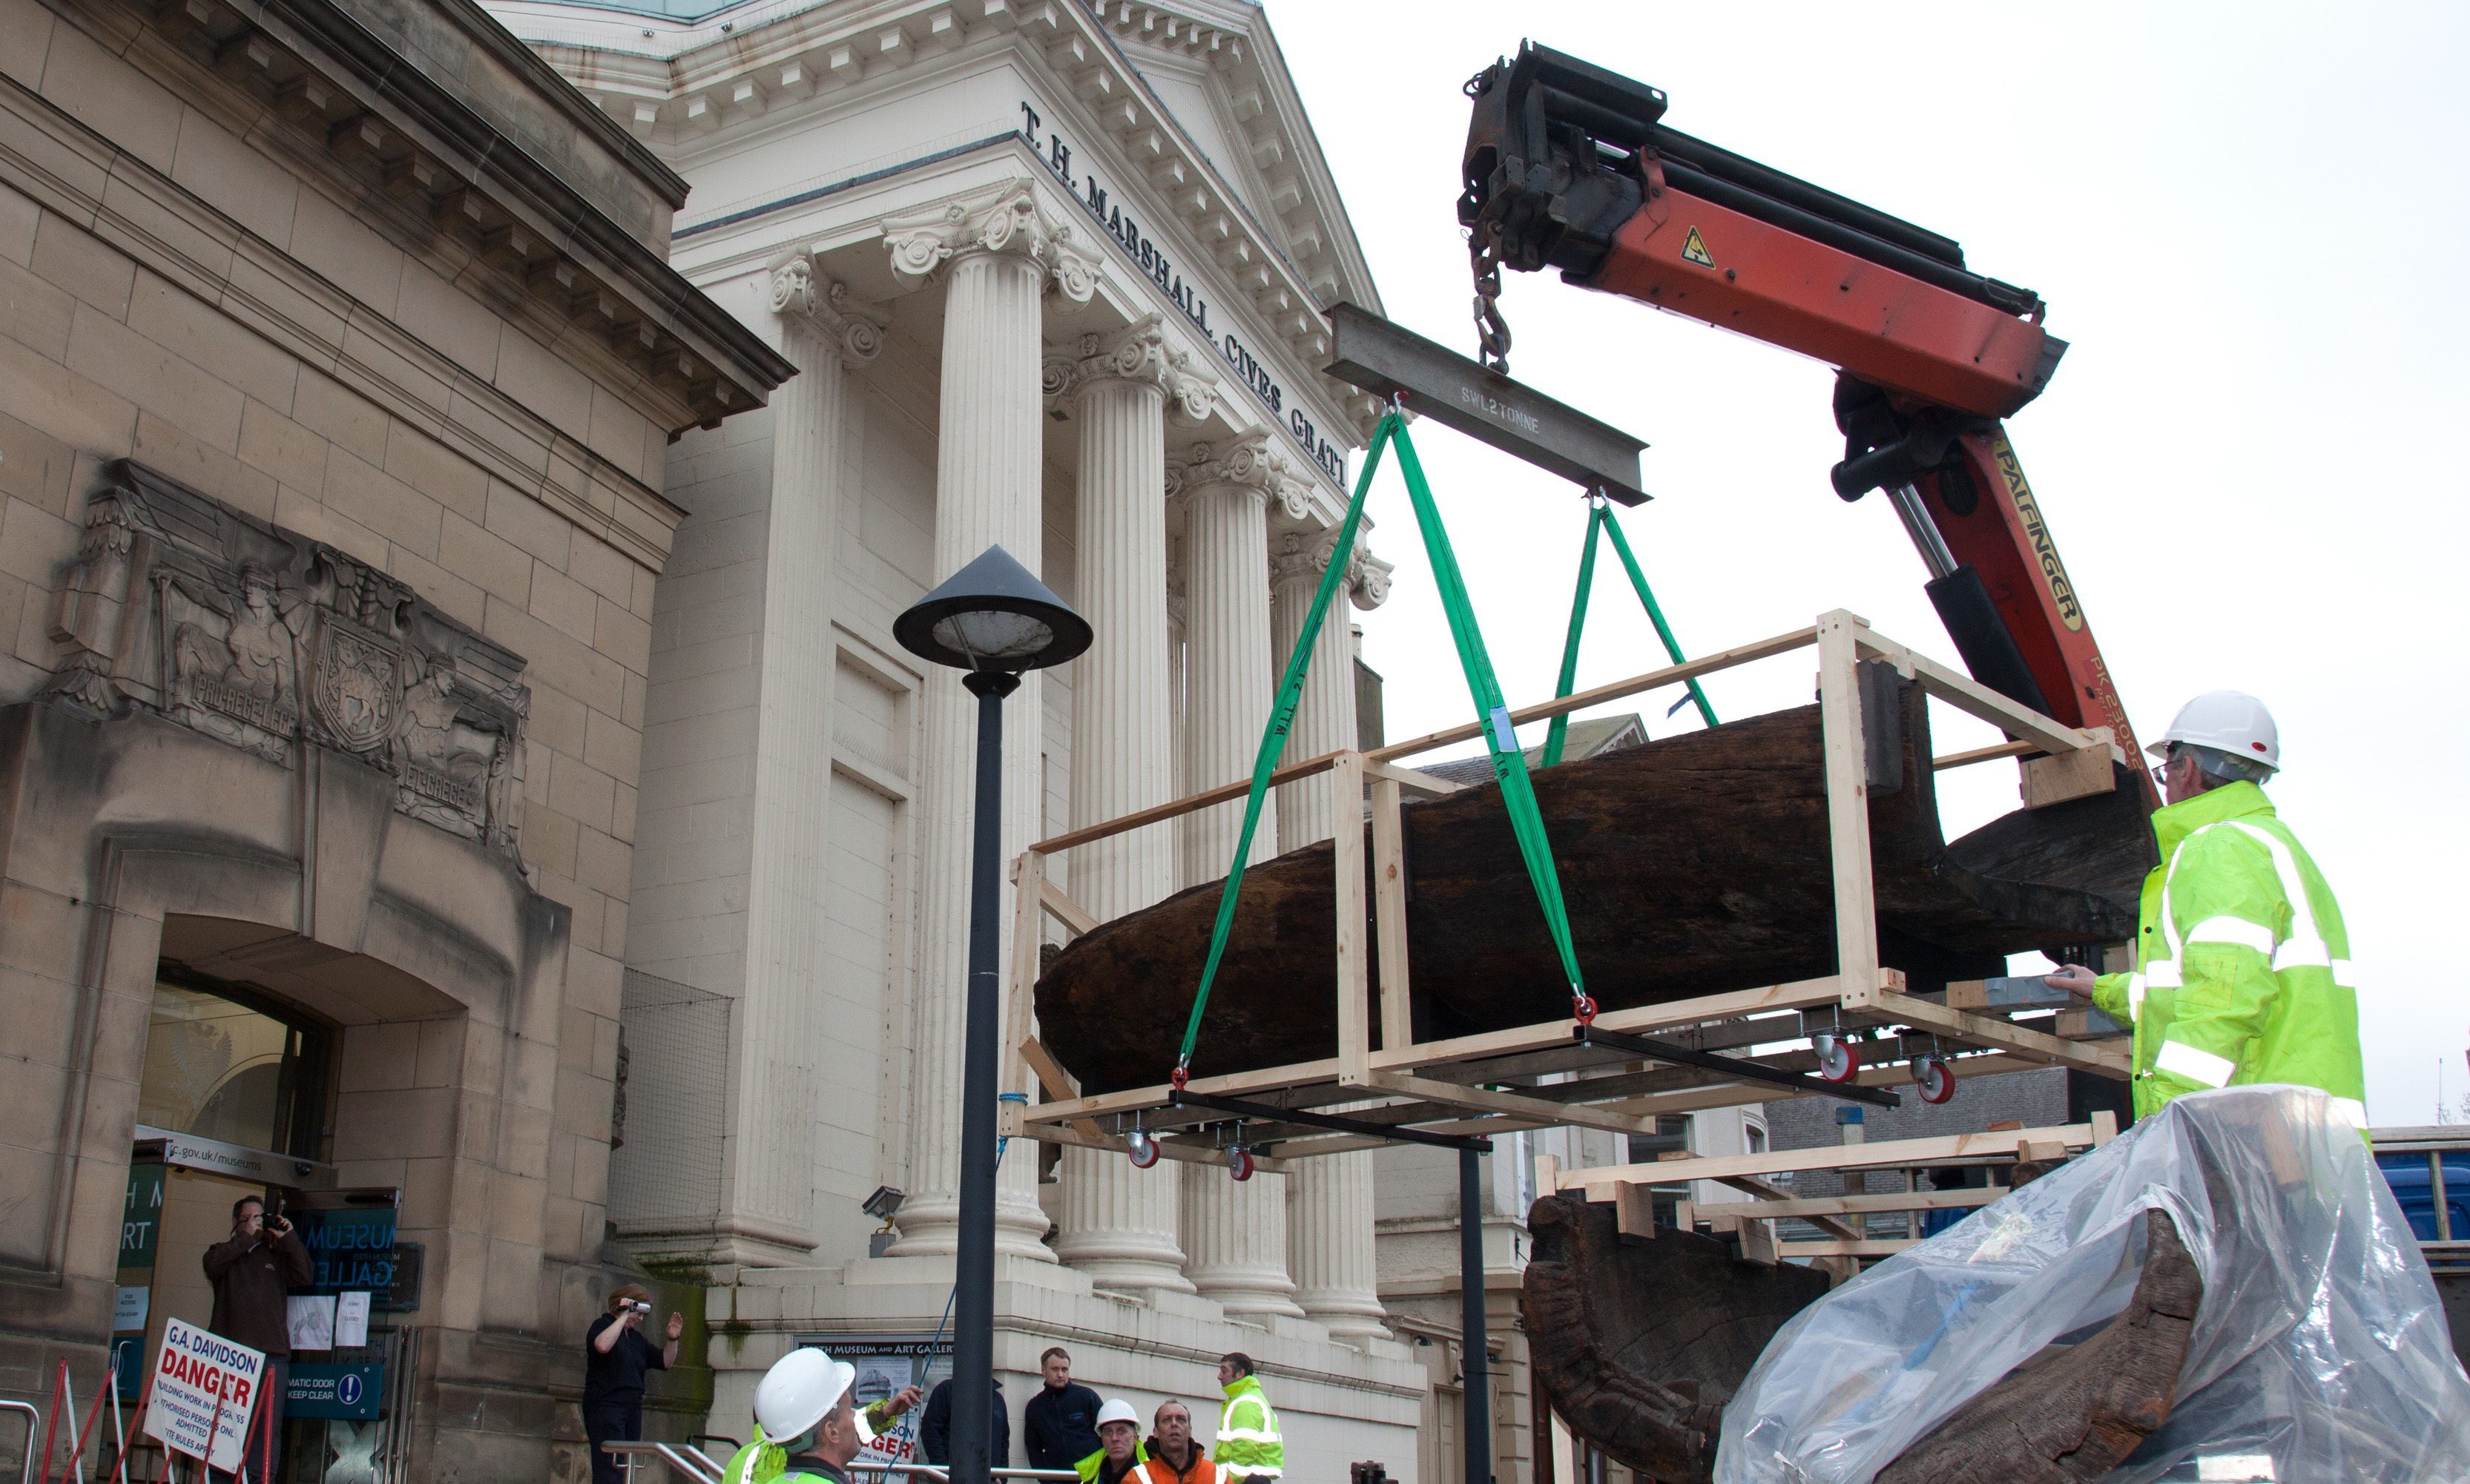 The 3,000 year old log boat being lowered into Perth Museum and Art Gallery.